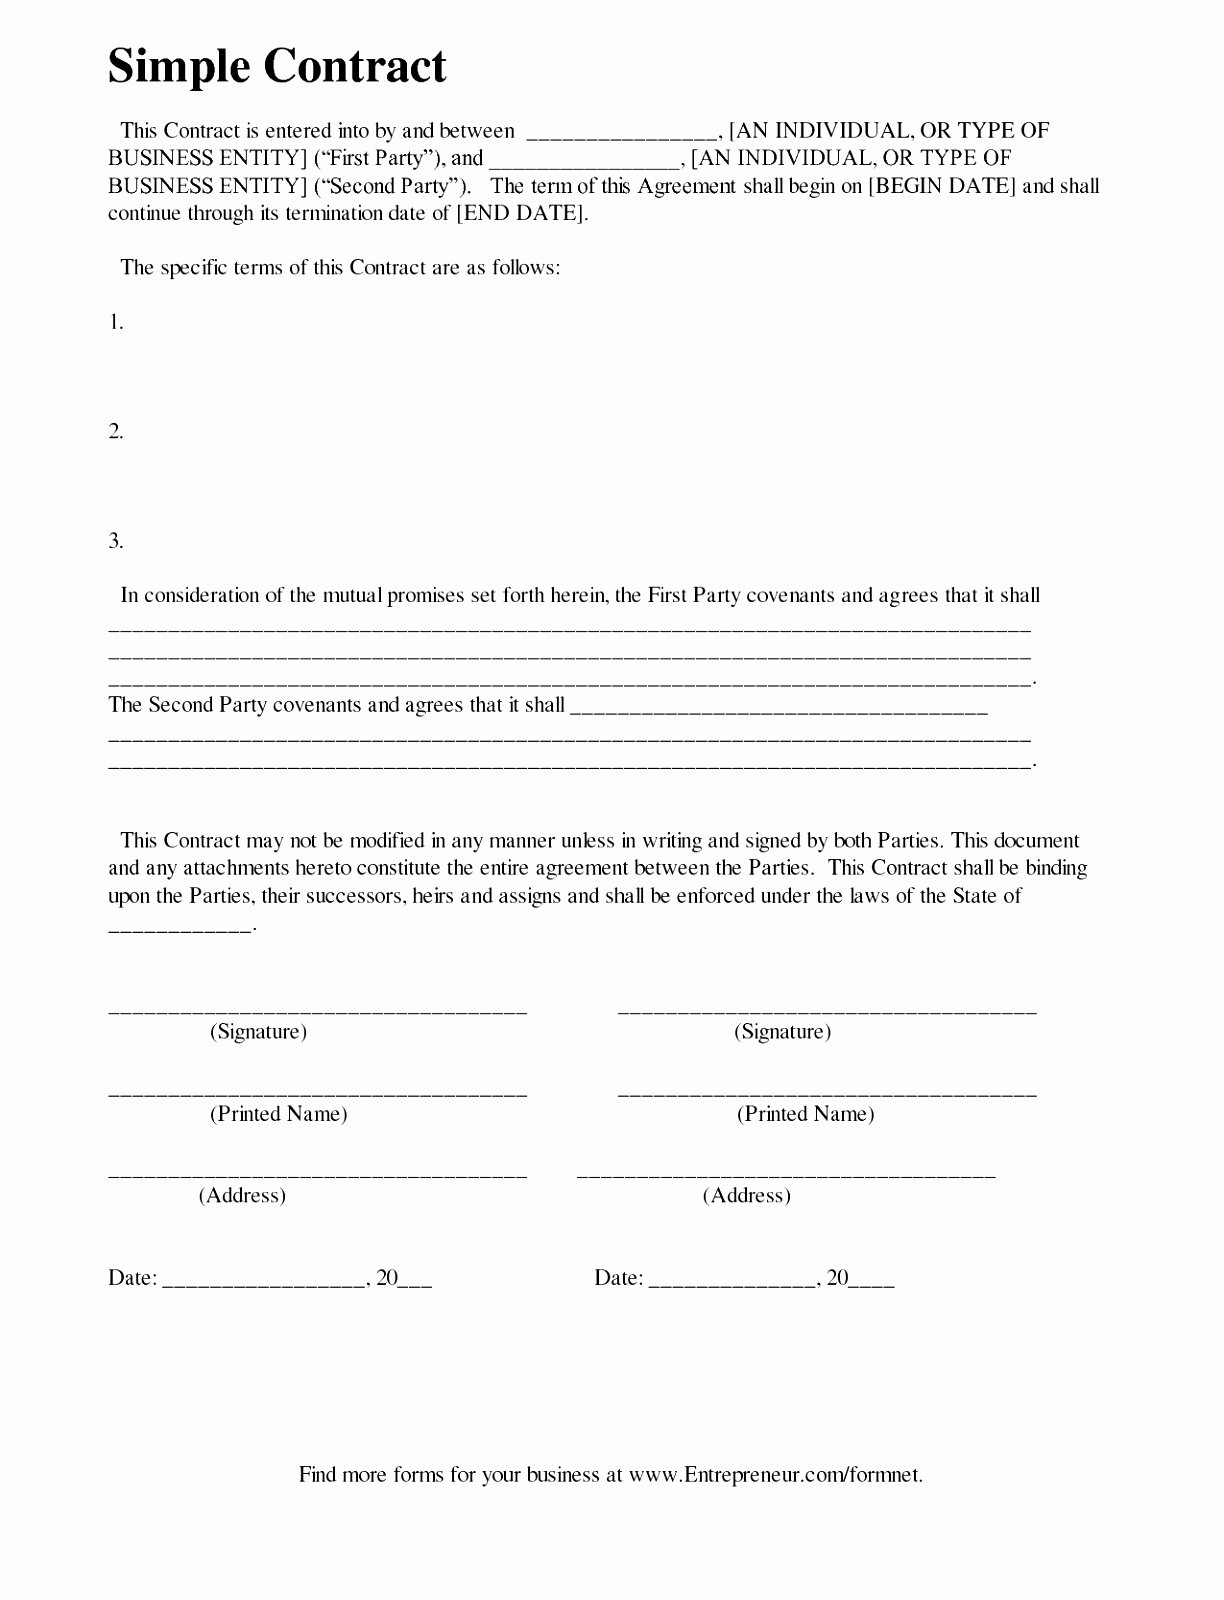 Simple Service Agreement Template Fresh 6 Simple Contract for Services Template attiu